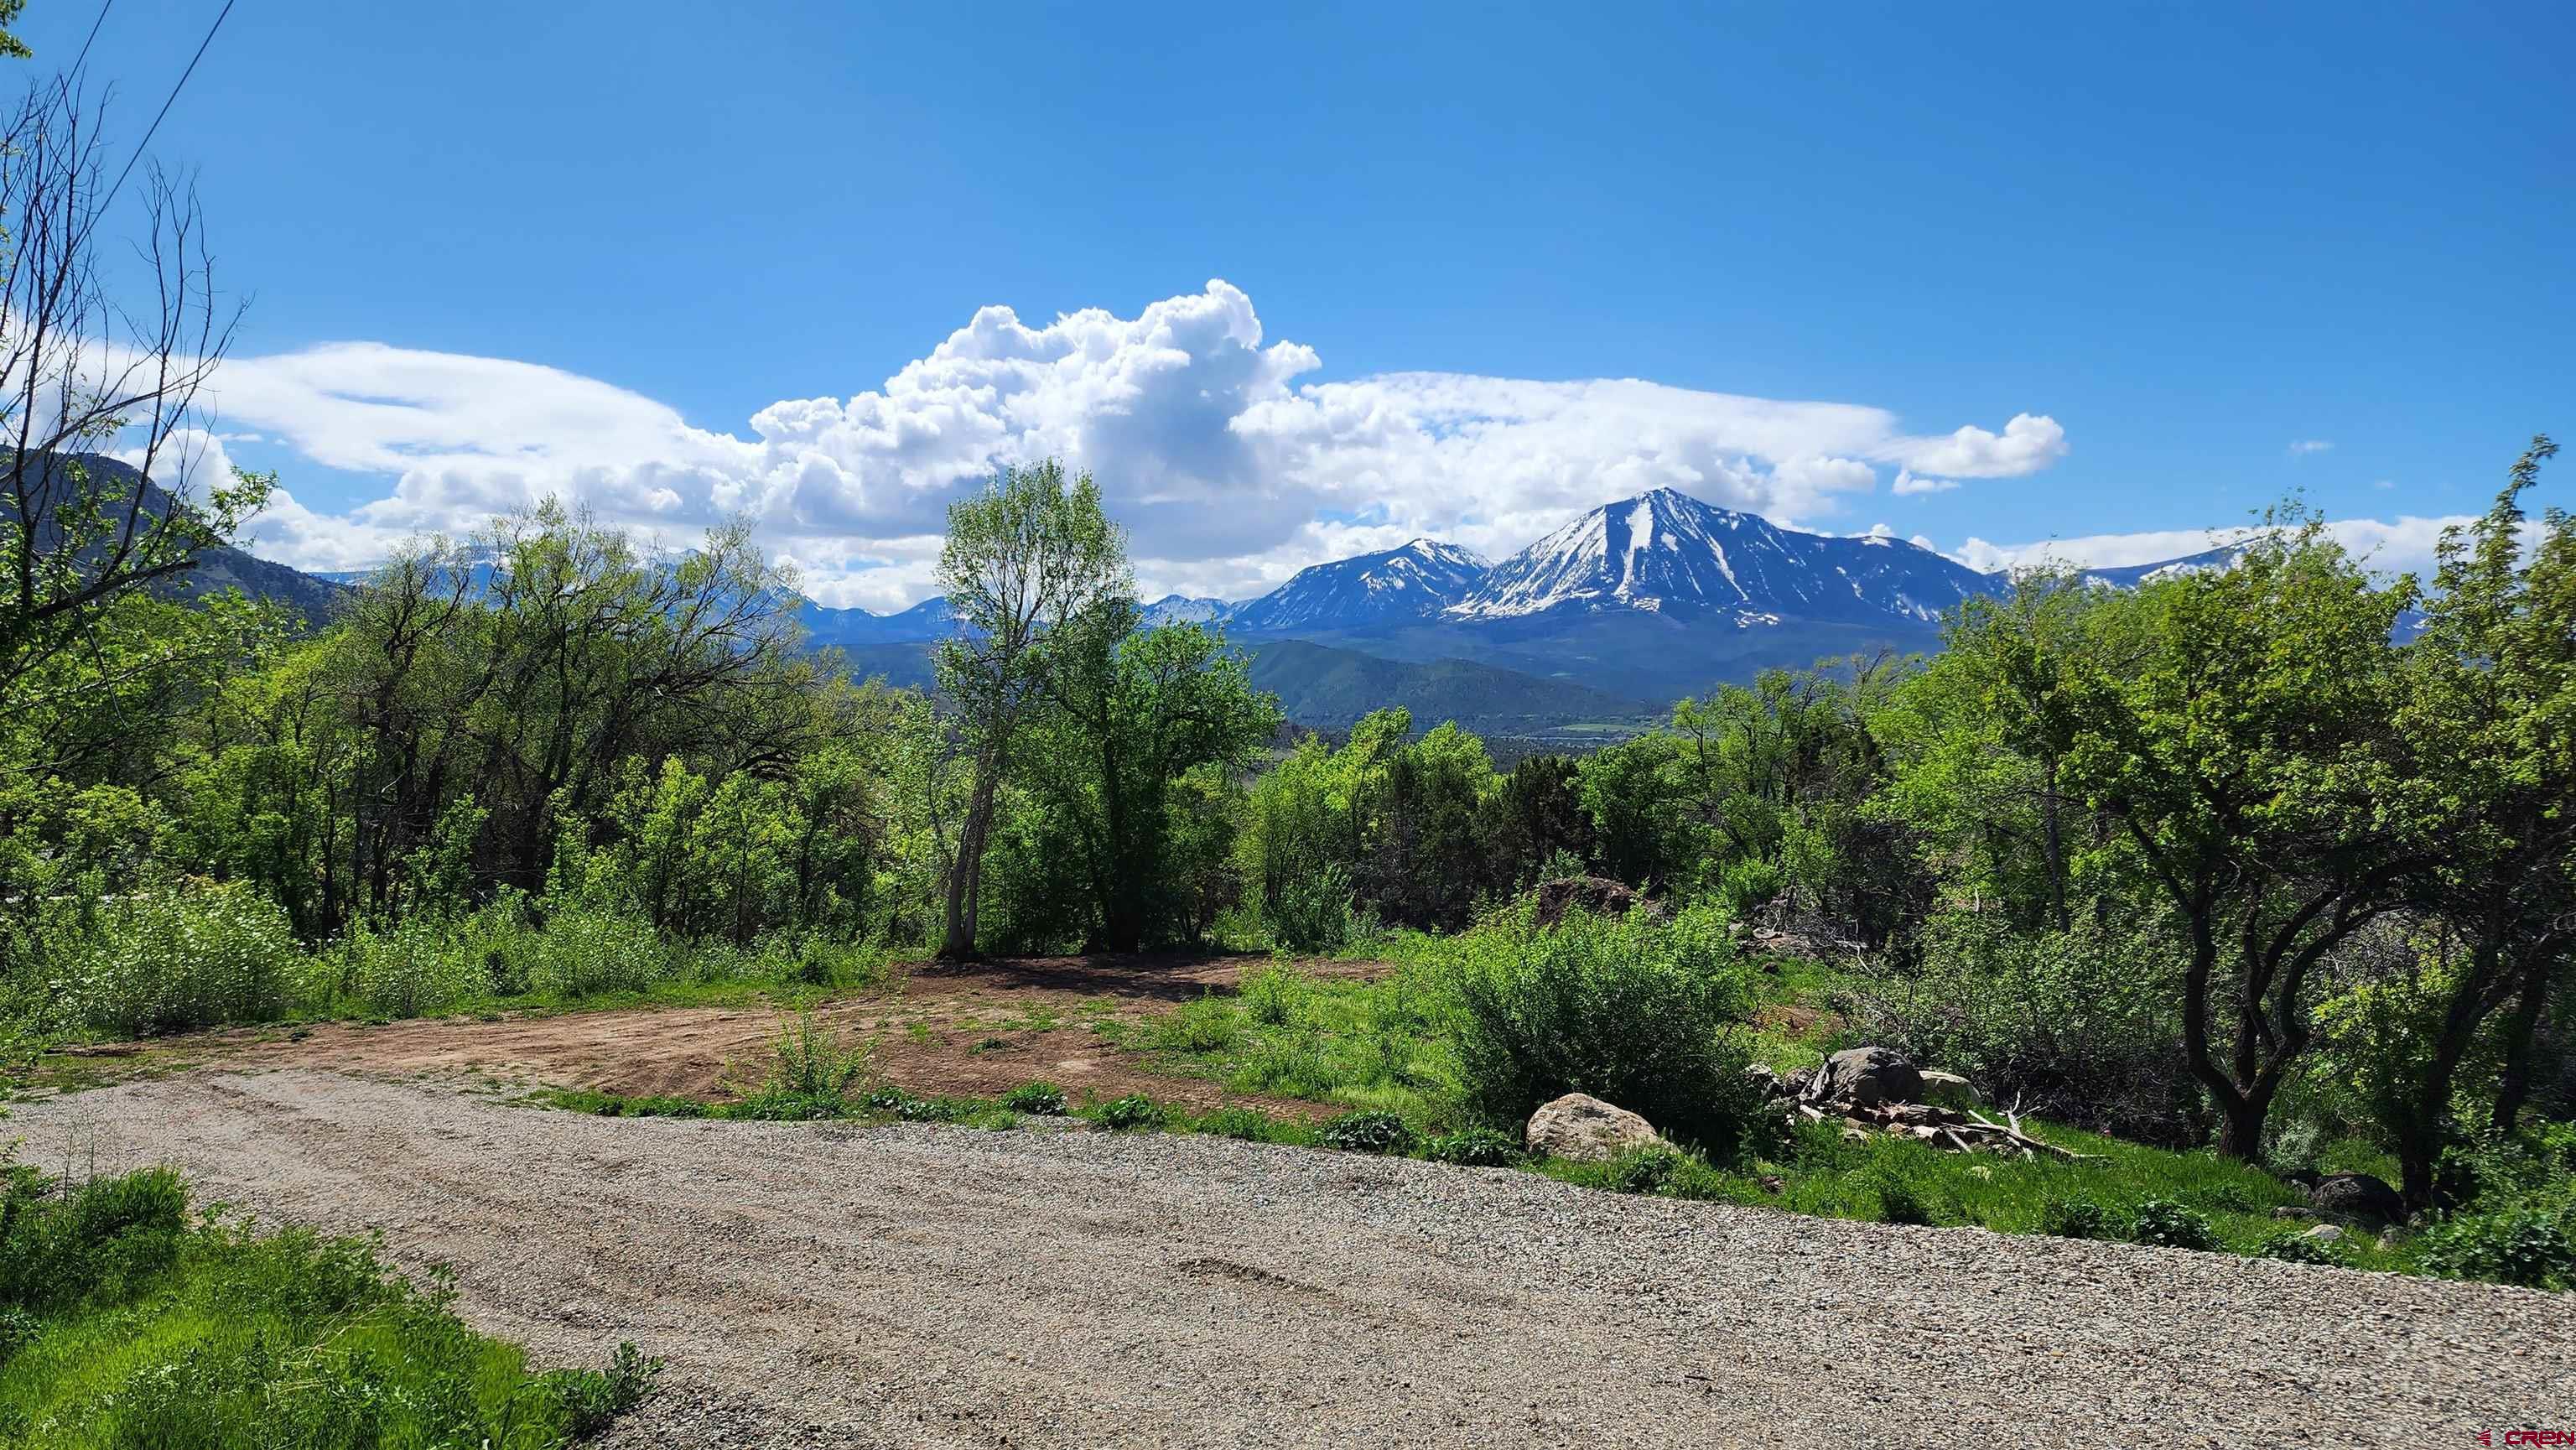 Very rare small acreage property with a well in Paonia. Five minute drive to town (1.7 miles), half a mile to Azura winery, beautiful views of the West Elks and Mt. Lamborn. Driveway and well are both installed. Septic has been engineered and permit has been issued though system is not yet installed. Site prep has been started including some dead tree removal. Electric is on the road. A lush property that provides privacy. Several apricot fruit trees. The North Fork Valley is a welcoming, thriving community with wineries, orchards, live music, farmer's markets, restaurants, grocery, art studios, breweries, movie theatre, hotels and more. Come fall in love with this beautiful location!